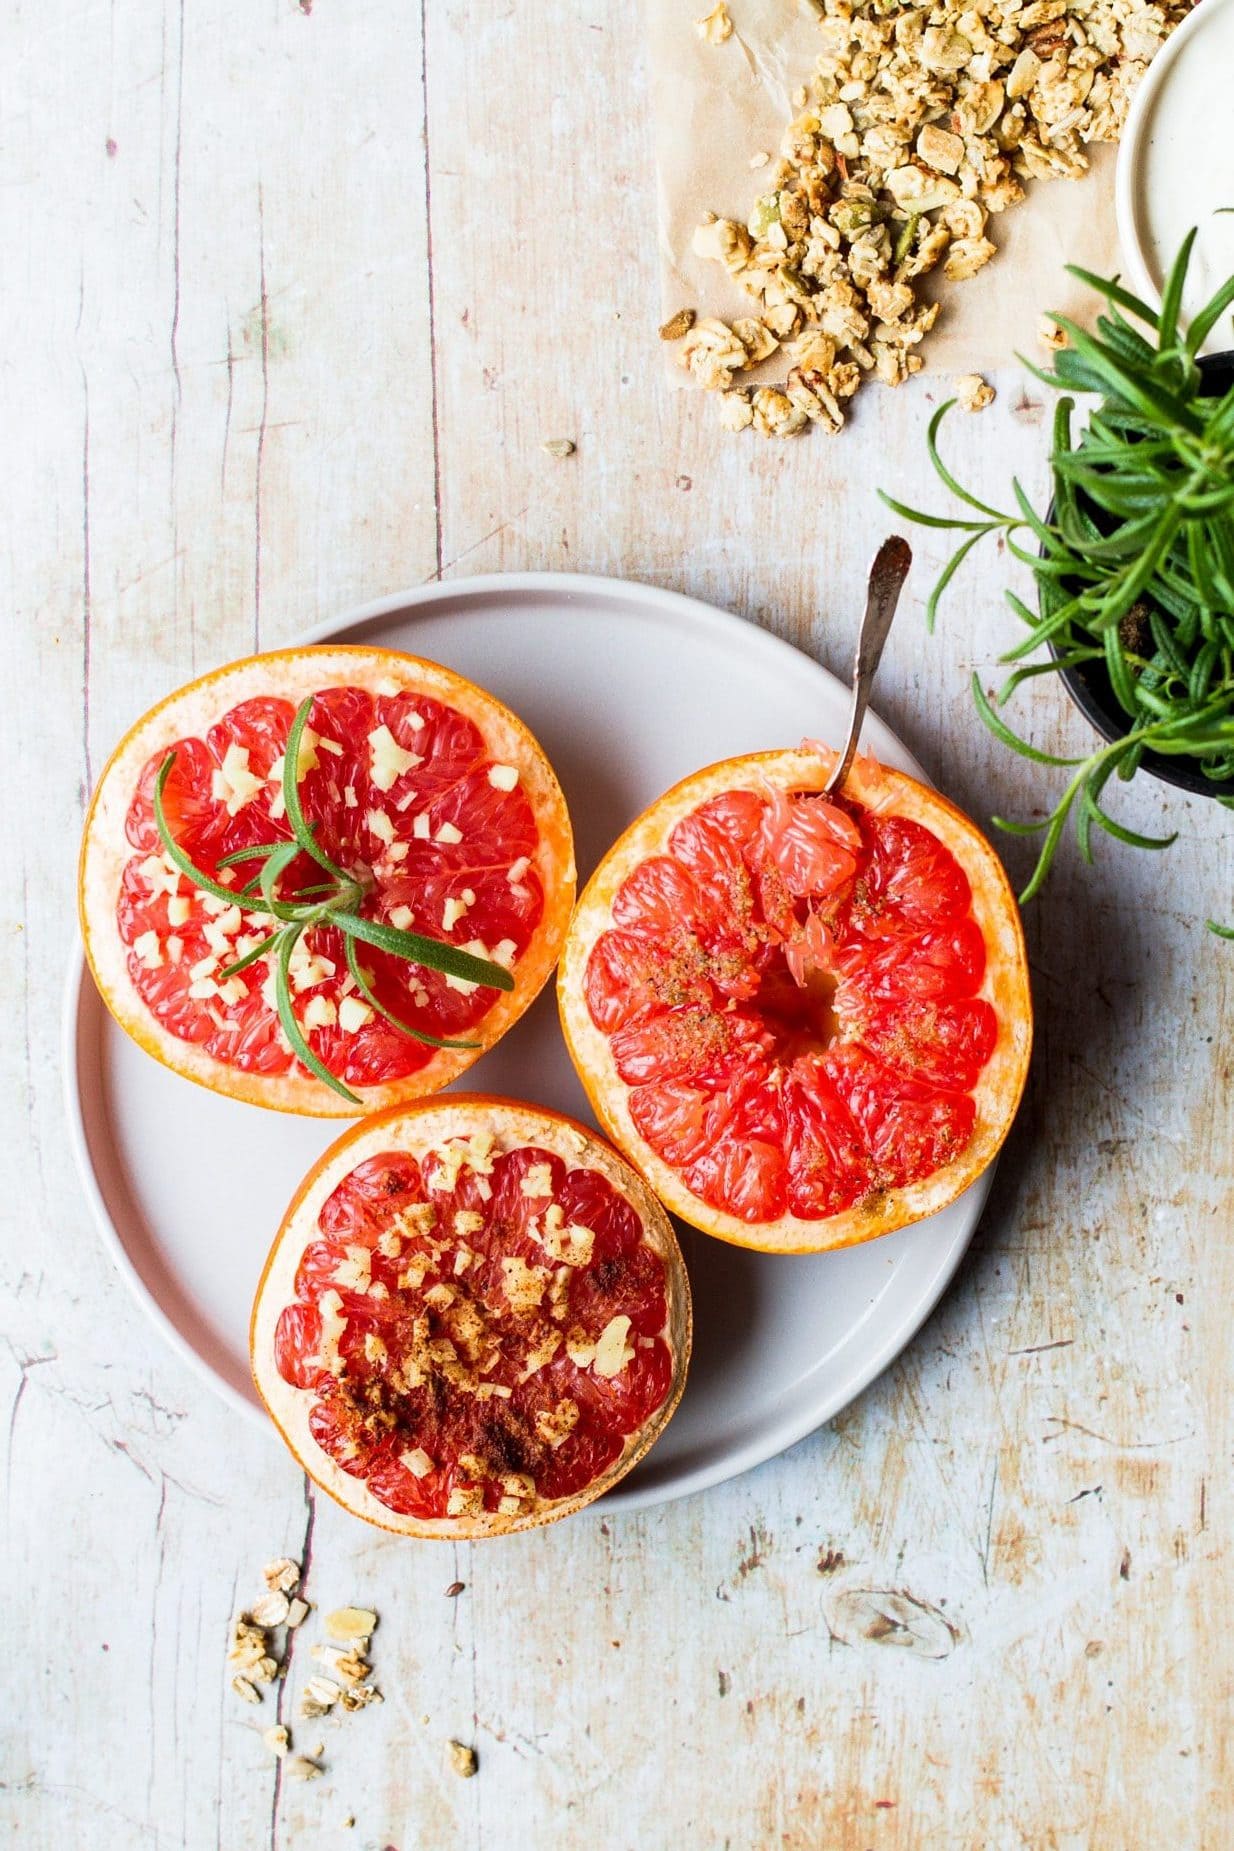 Bird's eye view of three half grapefruits on a beige plate and a light wooden background. One has a spoon in, one has rosemary on and one has spice sprinkles. A little rosemary and granola in the corner of the shot.